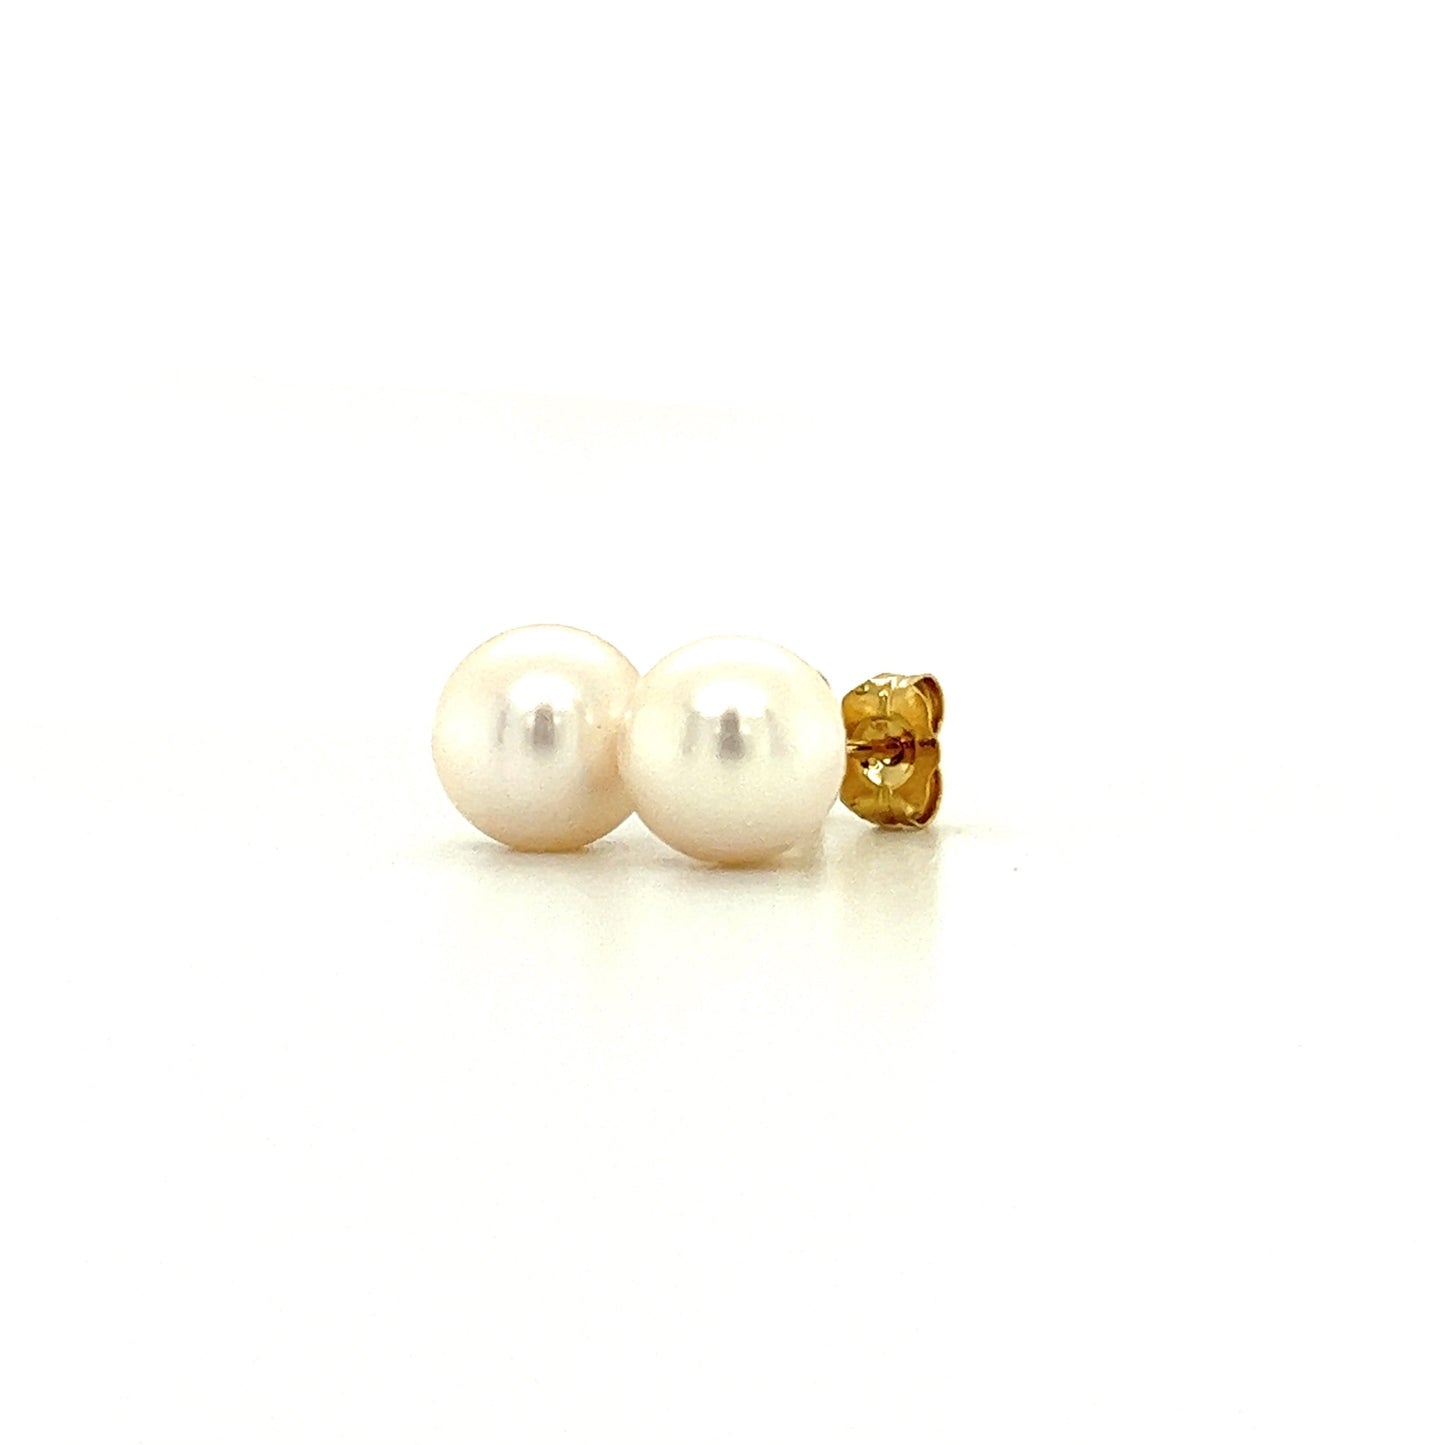 Pearl 7mm Stud Earrings in 14K Yellow Gold Right Side View